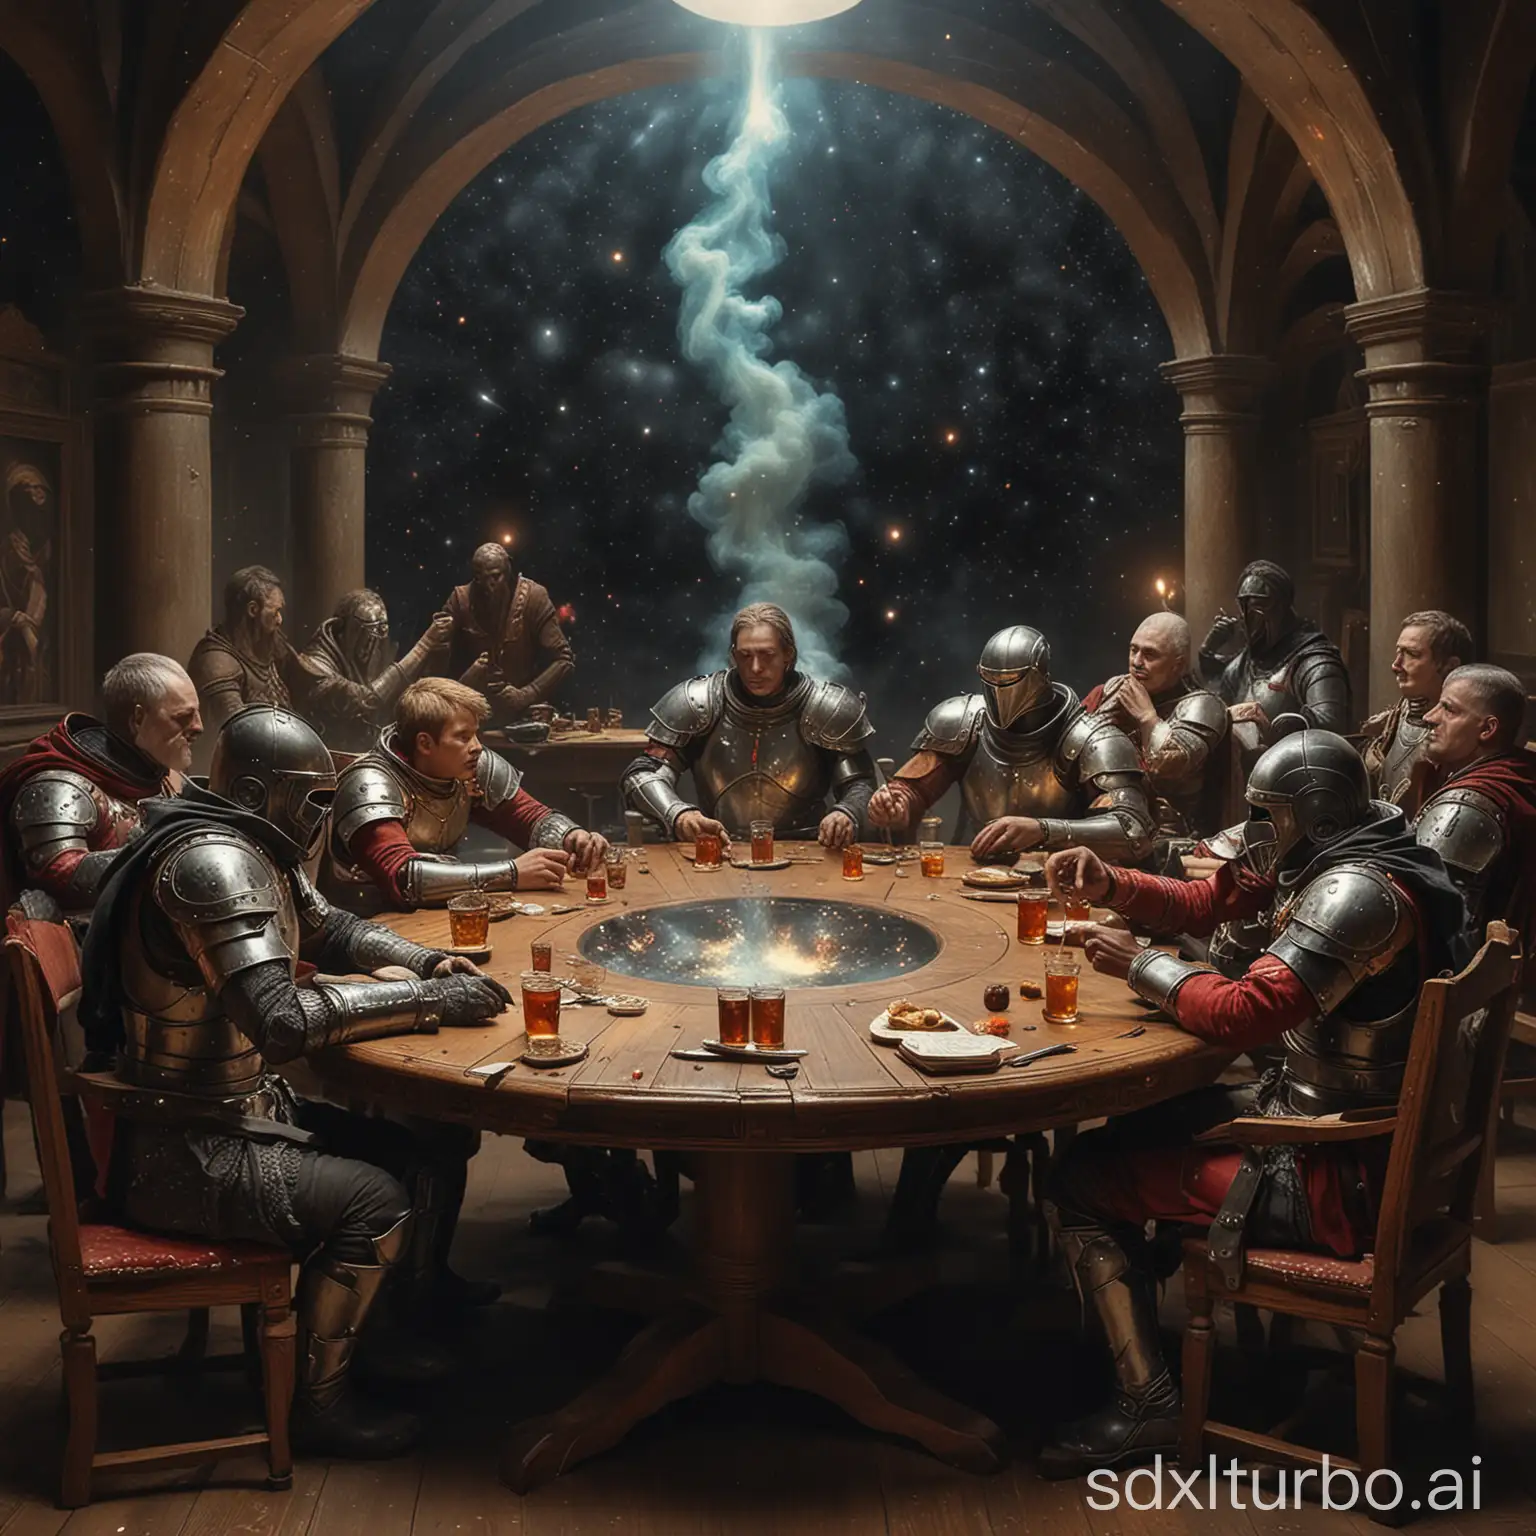 Godlike-Beings-of-the-Round-Table-in-Galactic-Revelry